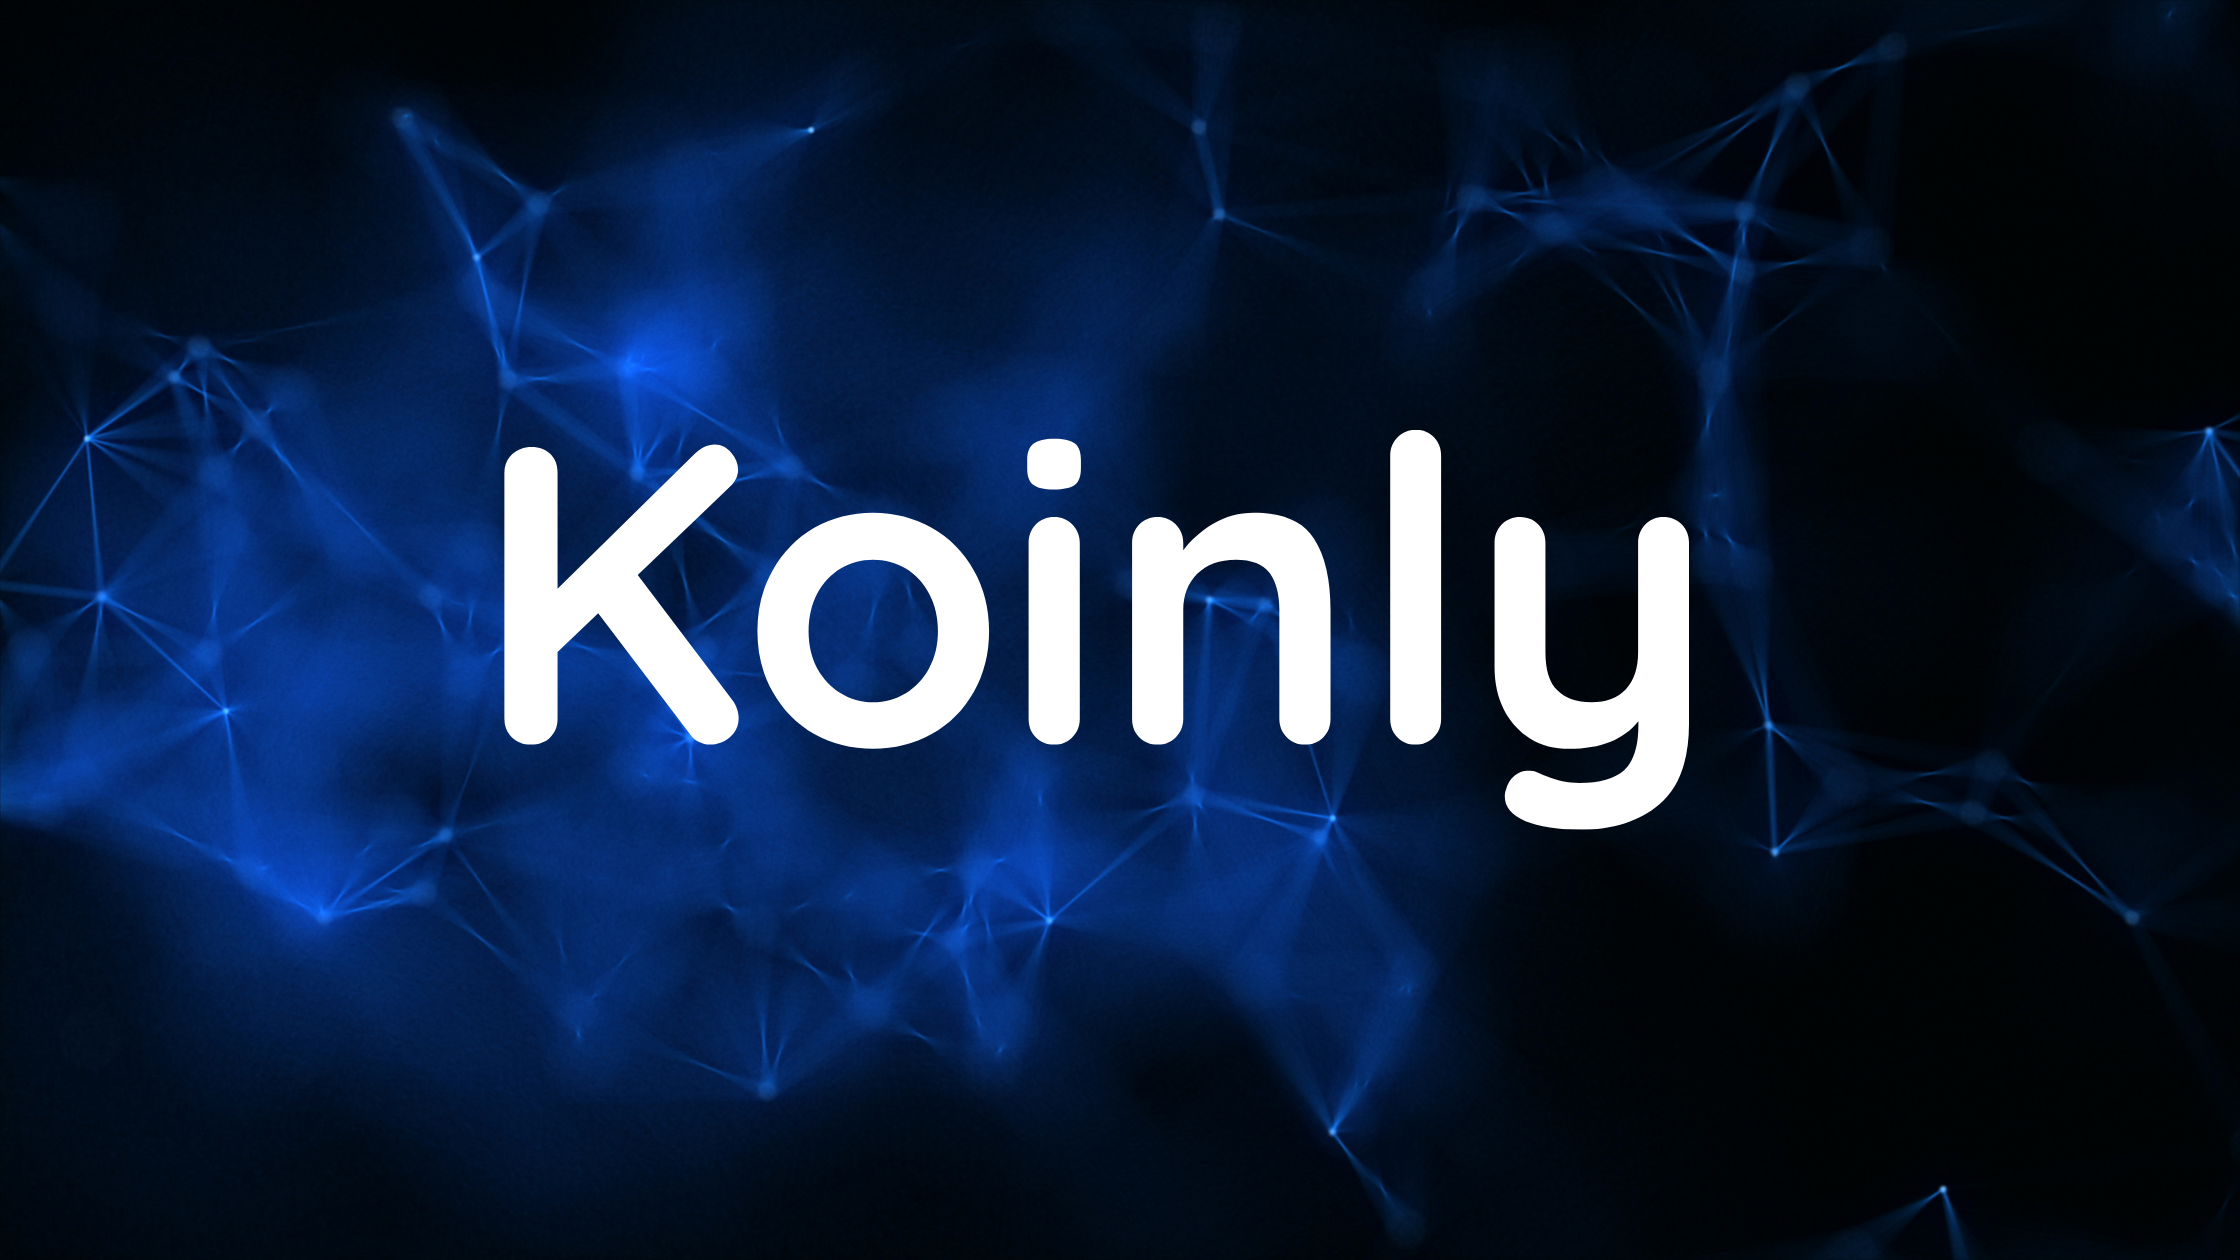 Koinly review